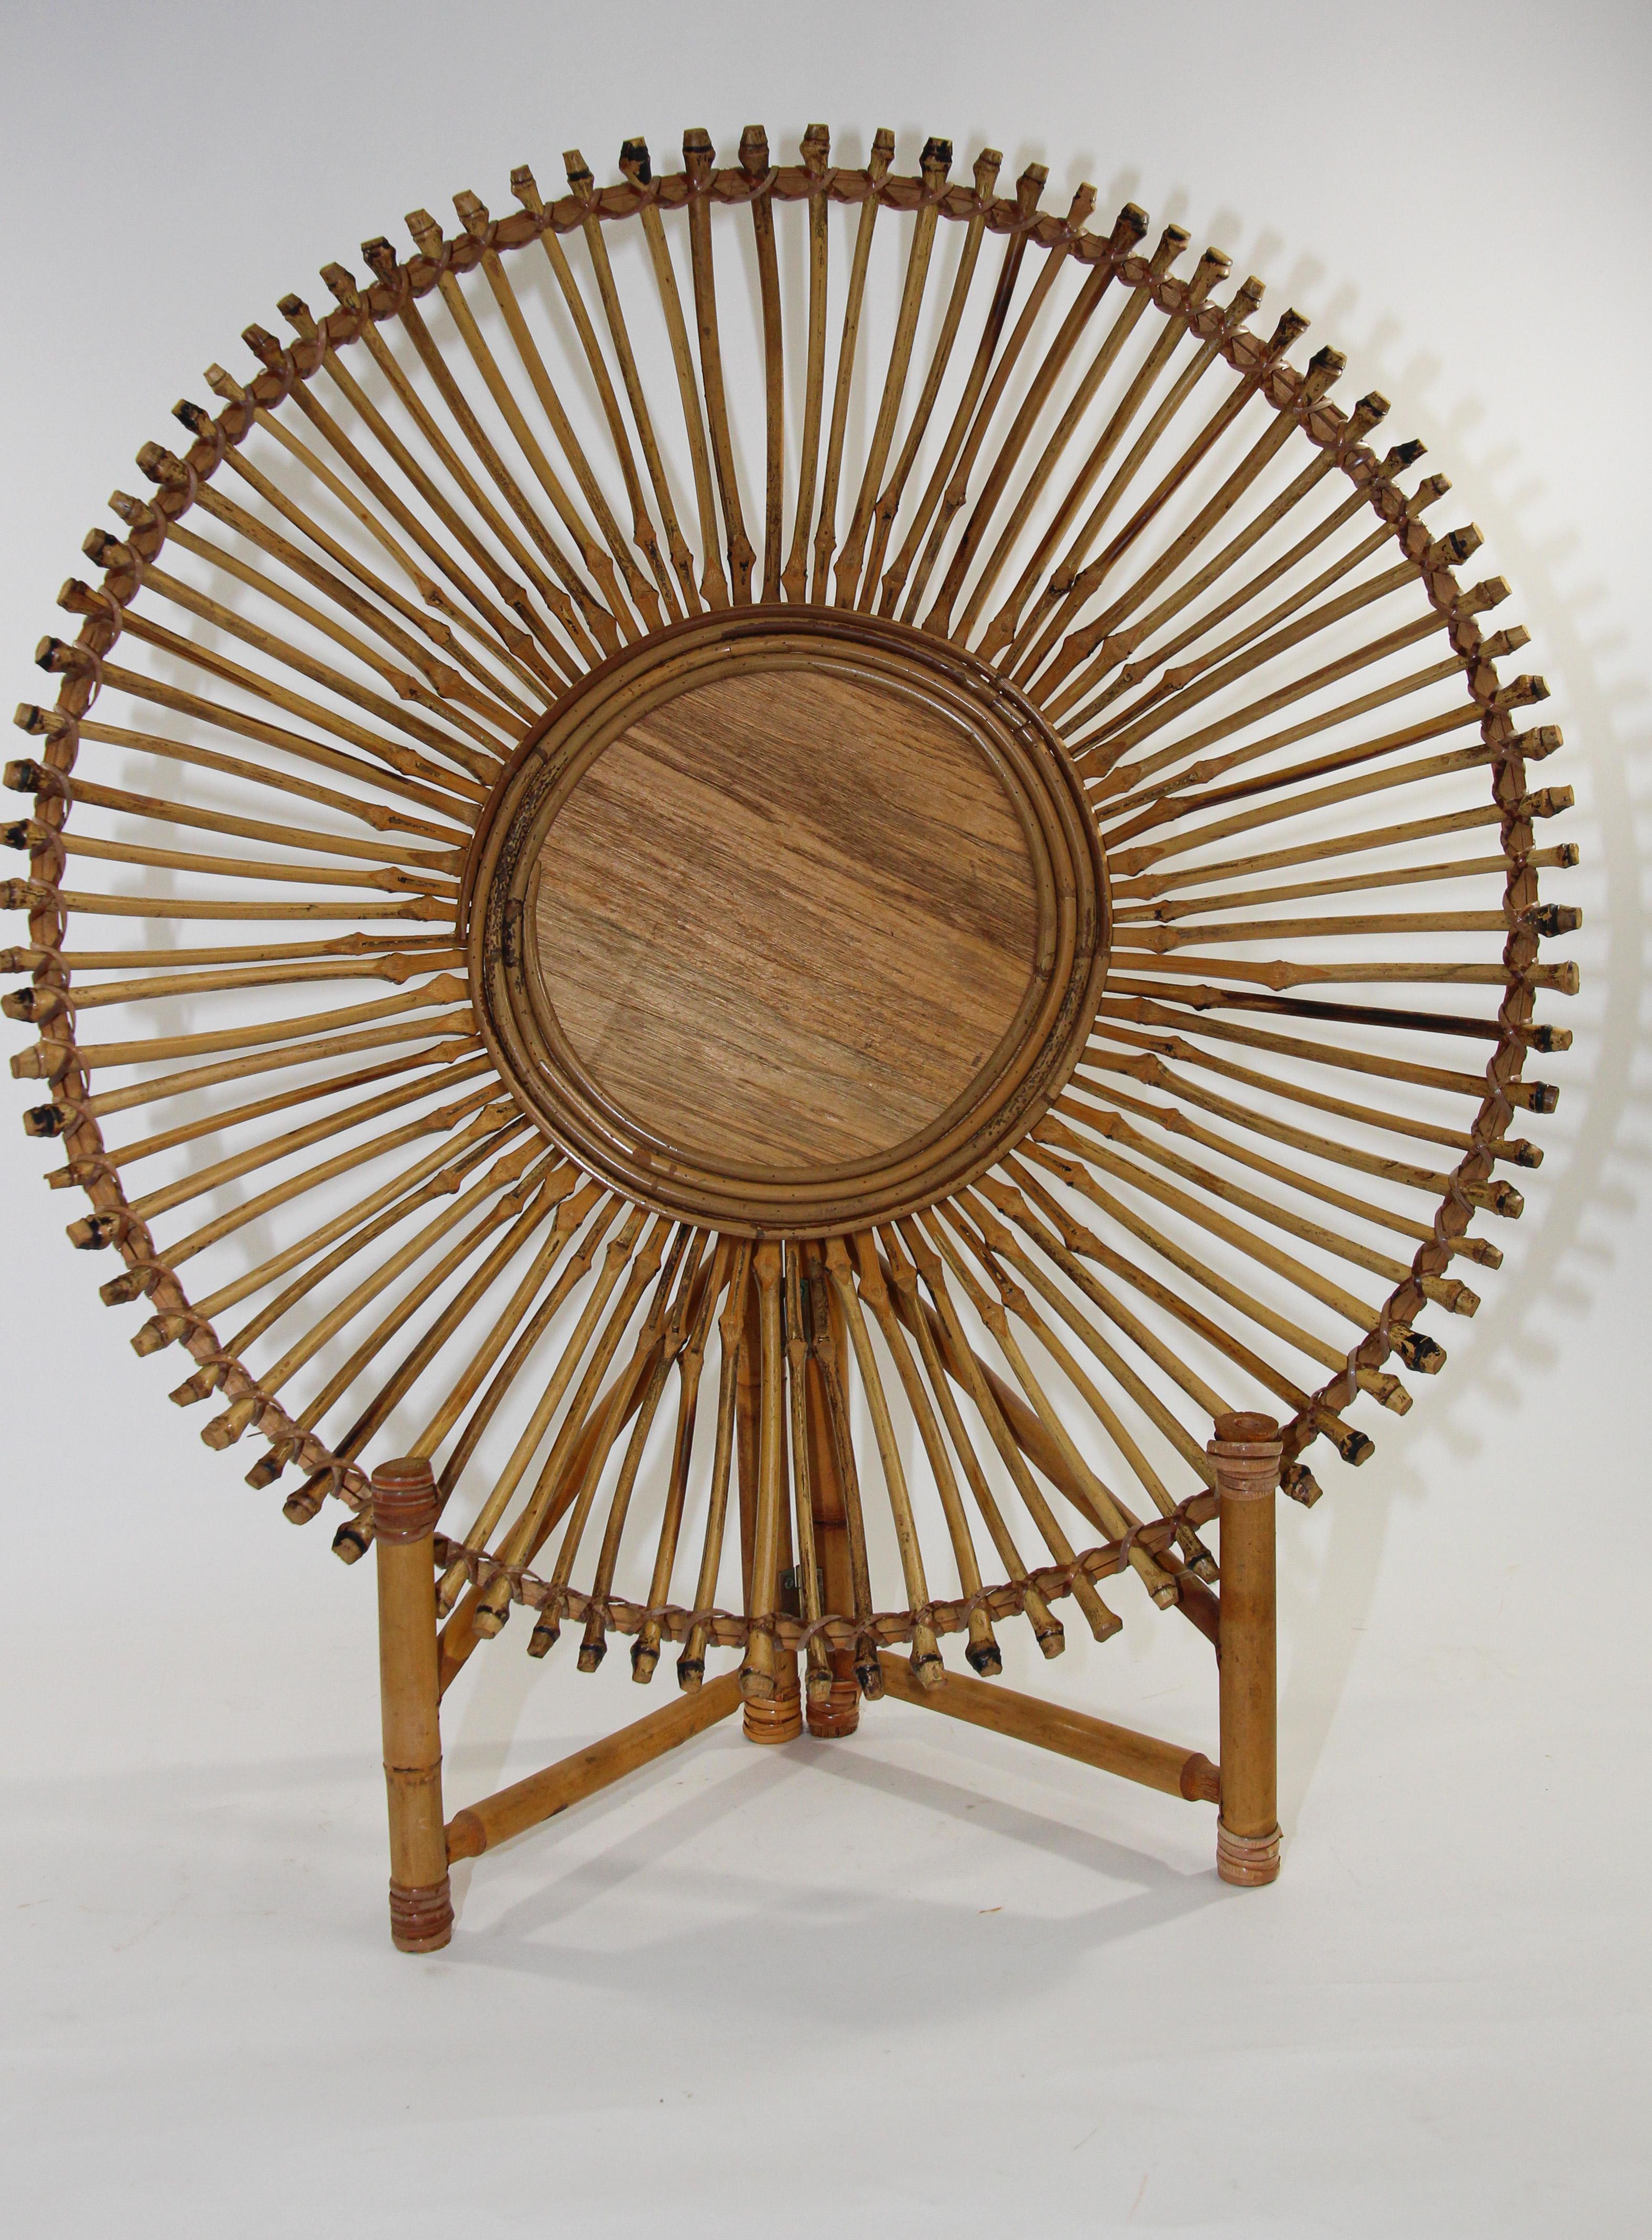 Large Asian rattan handcrafted decorative bowl on bamboo stand.
Large vintage tribal handwoven bamboo ethnic round basket.
Deep bowl shape, woven with seagrass technique and decorated with a wooden piece in the middle.
Definitely a statement